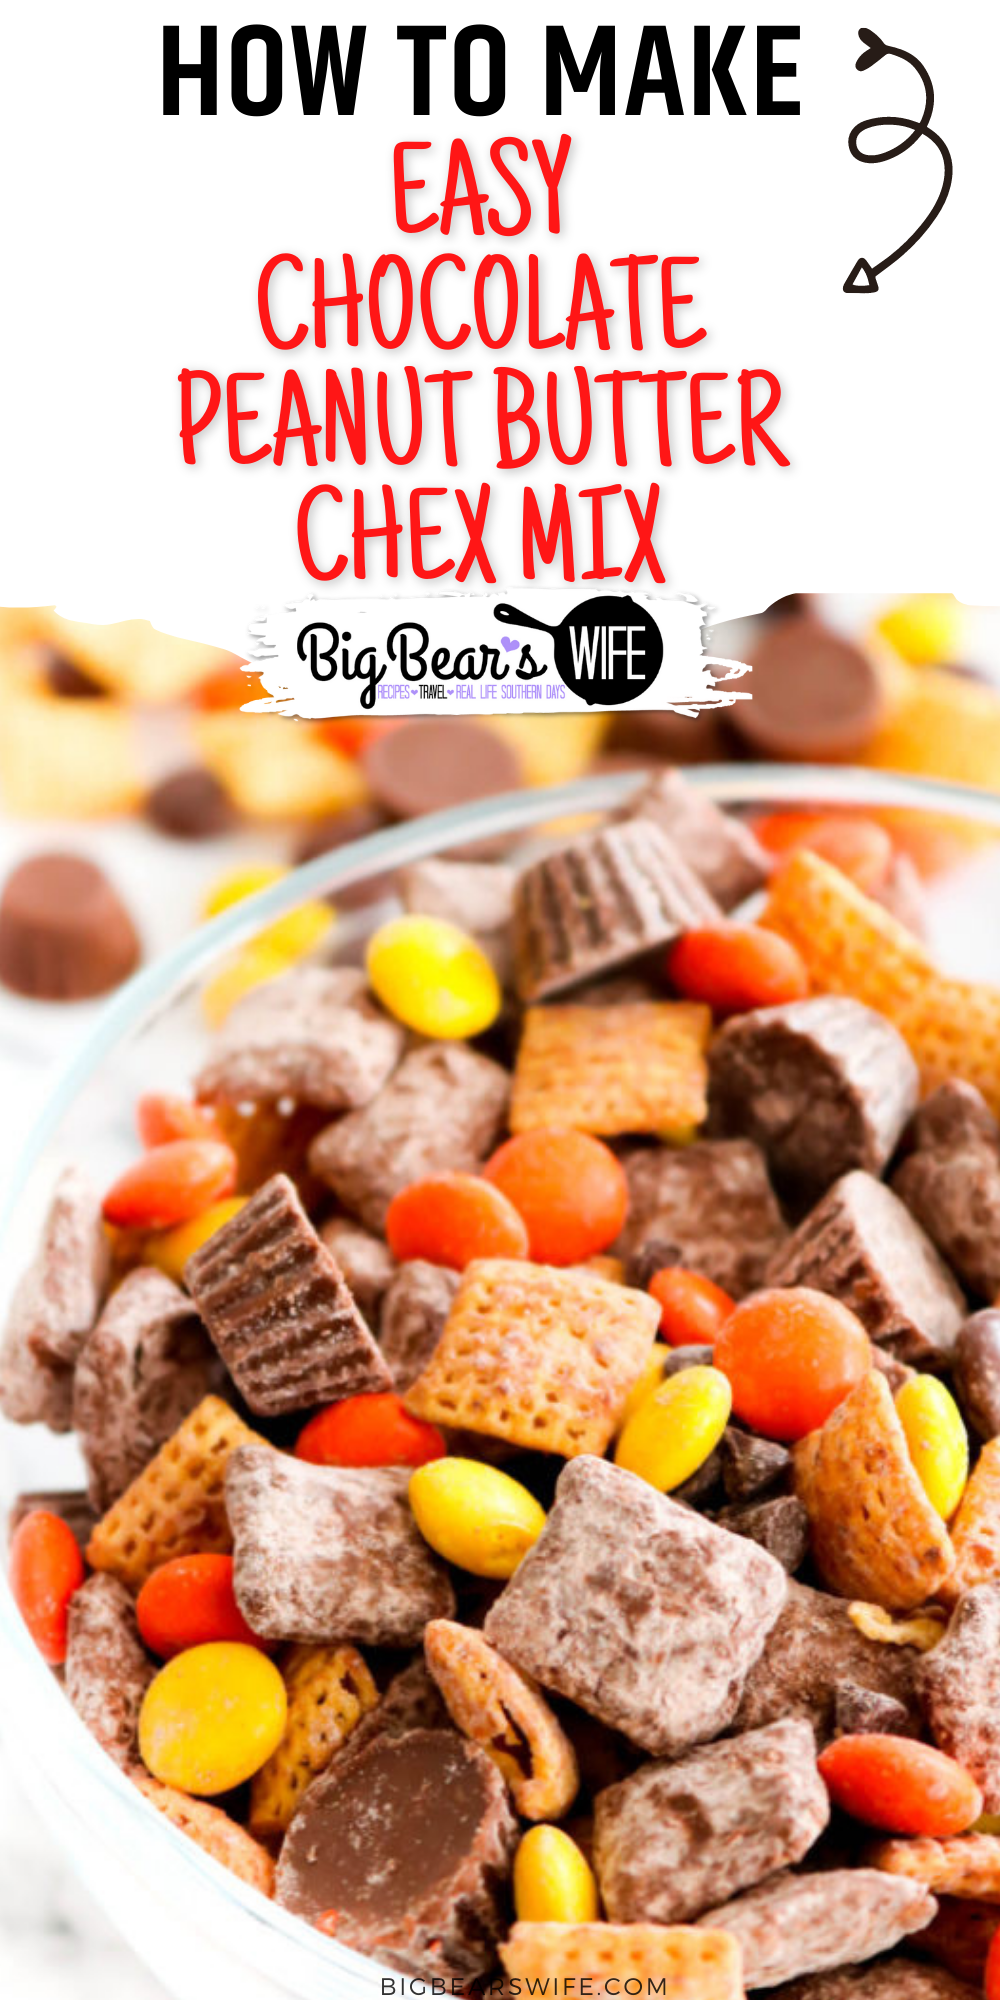 This Chocolate Peanut Butter Chex Mix is what dreams are made of! It's packed with tons of chocolate and peanut butter including peanut butter cereal, mini peanut butter cups and Reese's pieces! via @bigbearswife